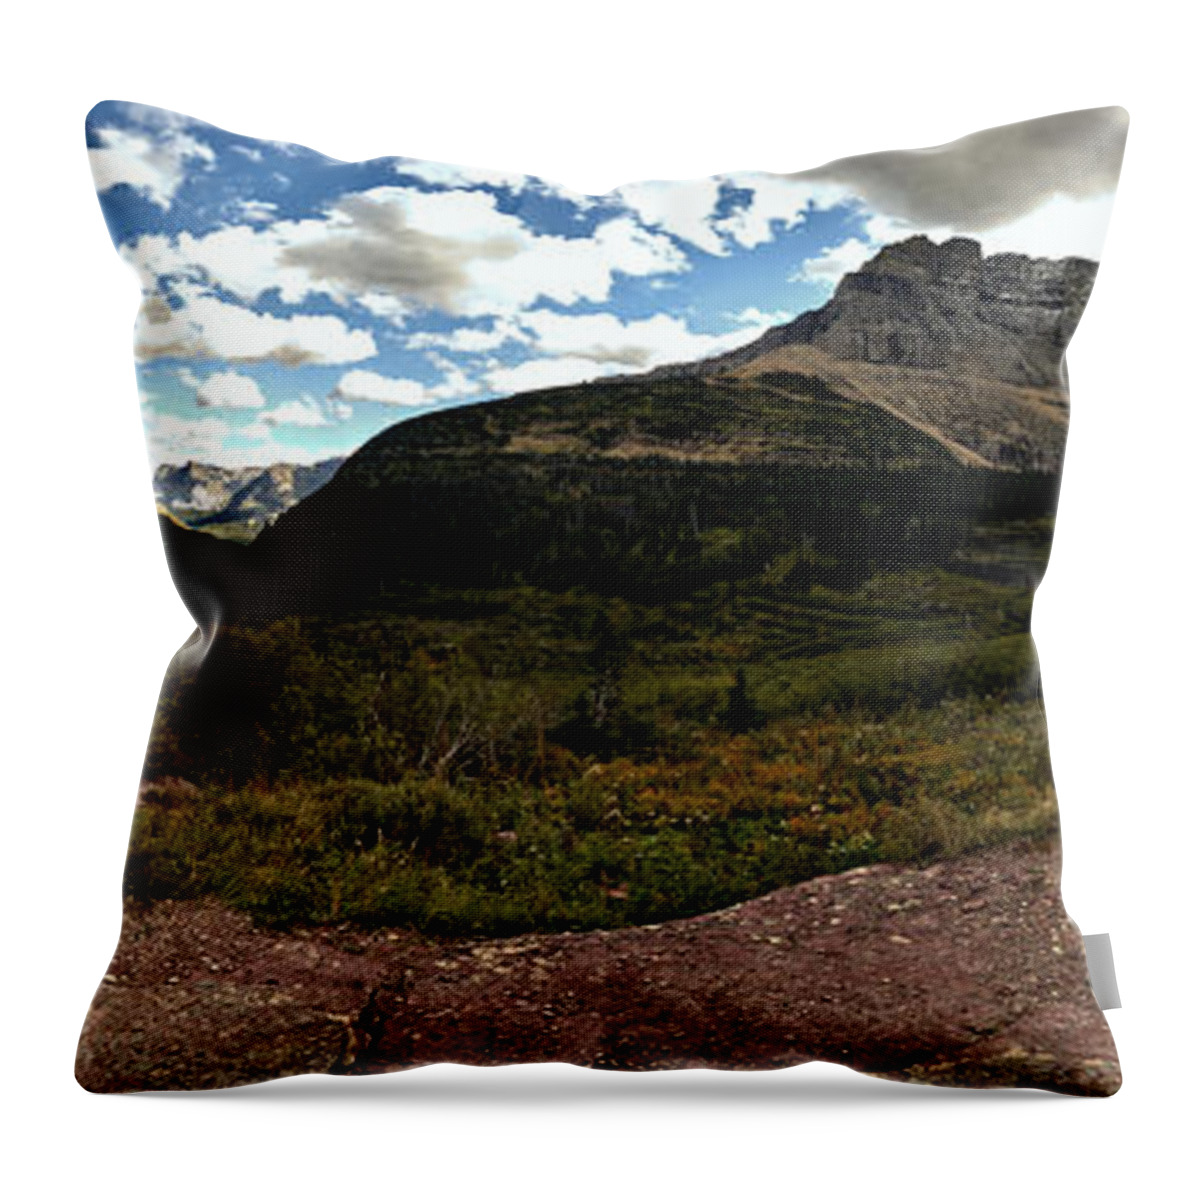  Throw Pillow featuring the photograph On The Way To Iceberg - Panorama by Adam Jewell